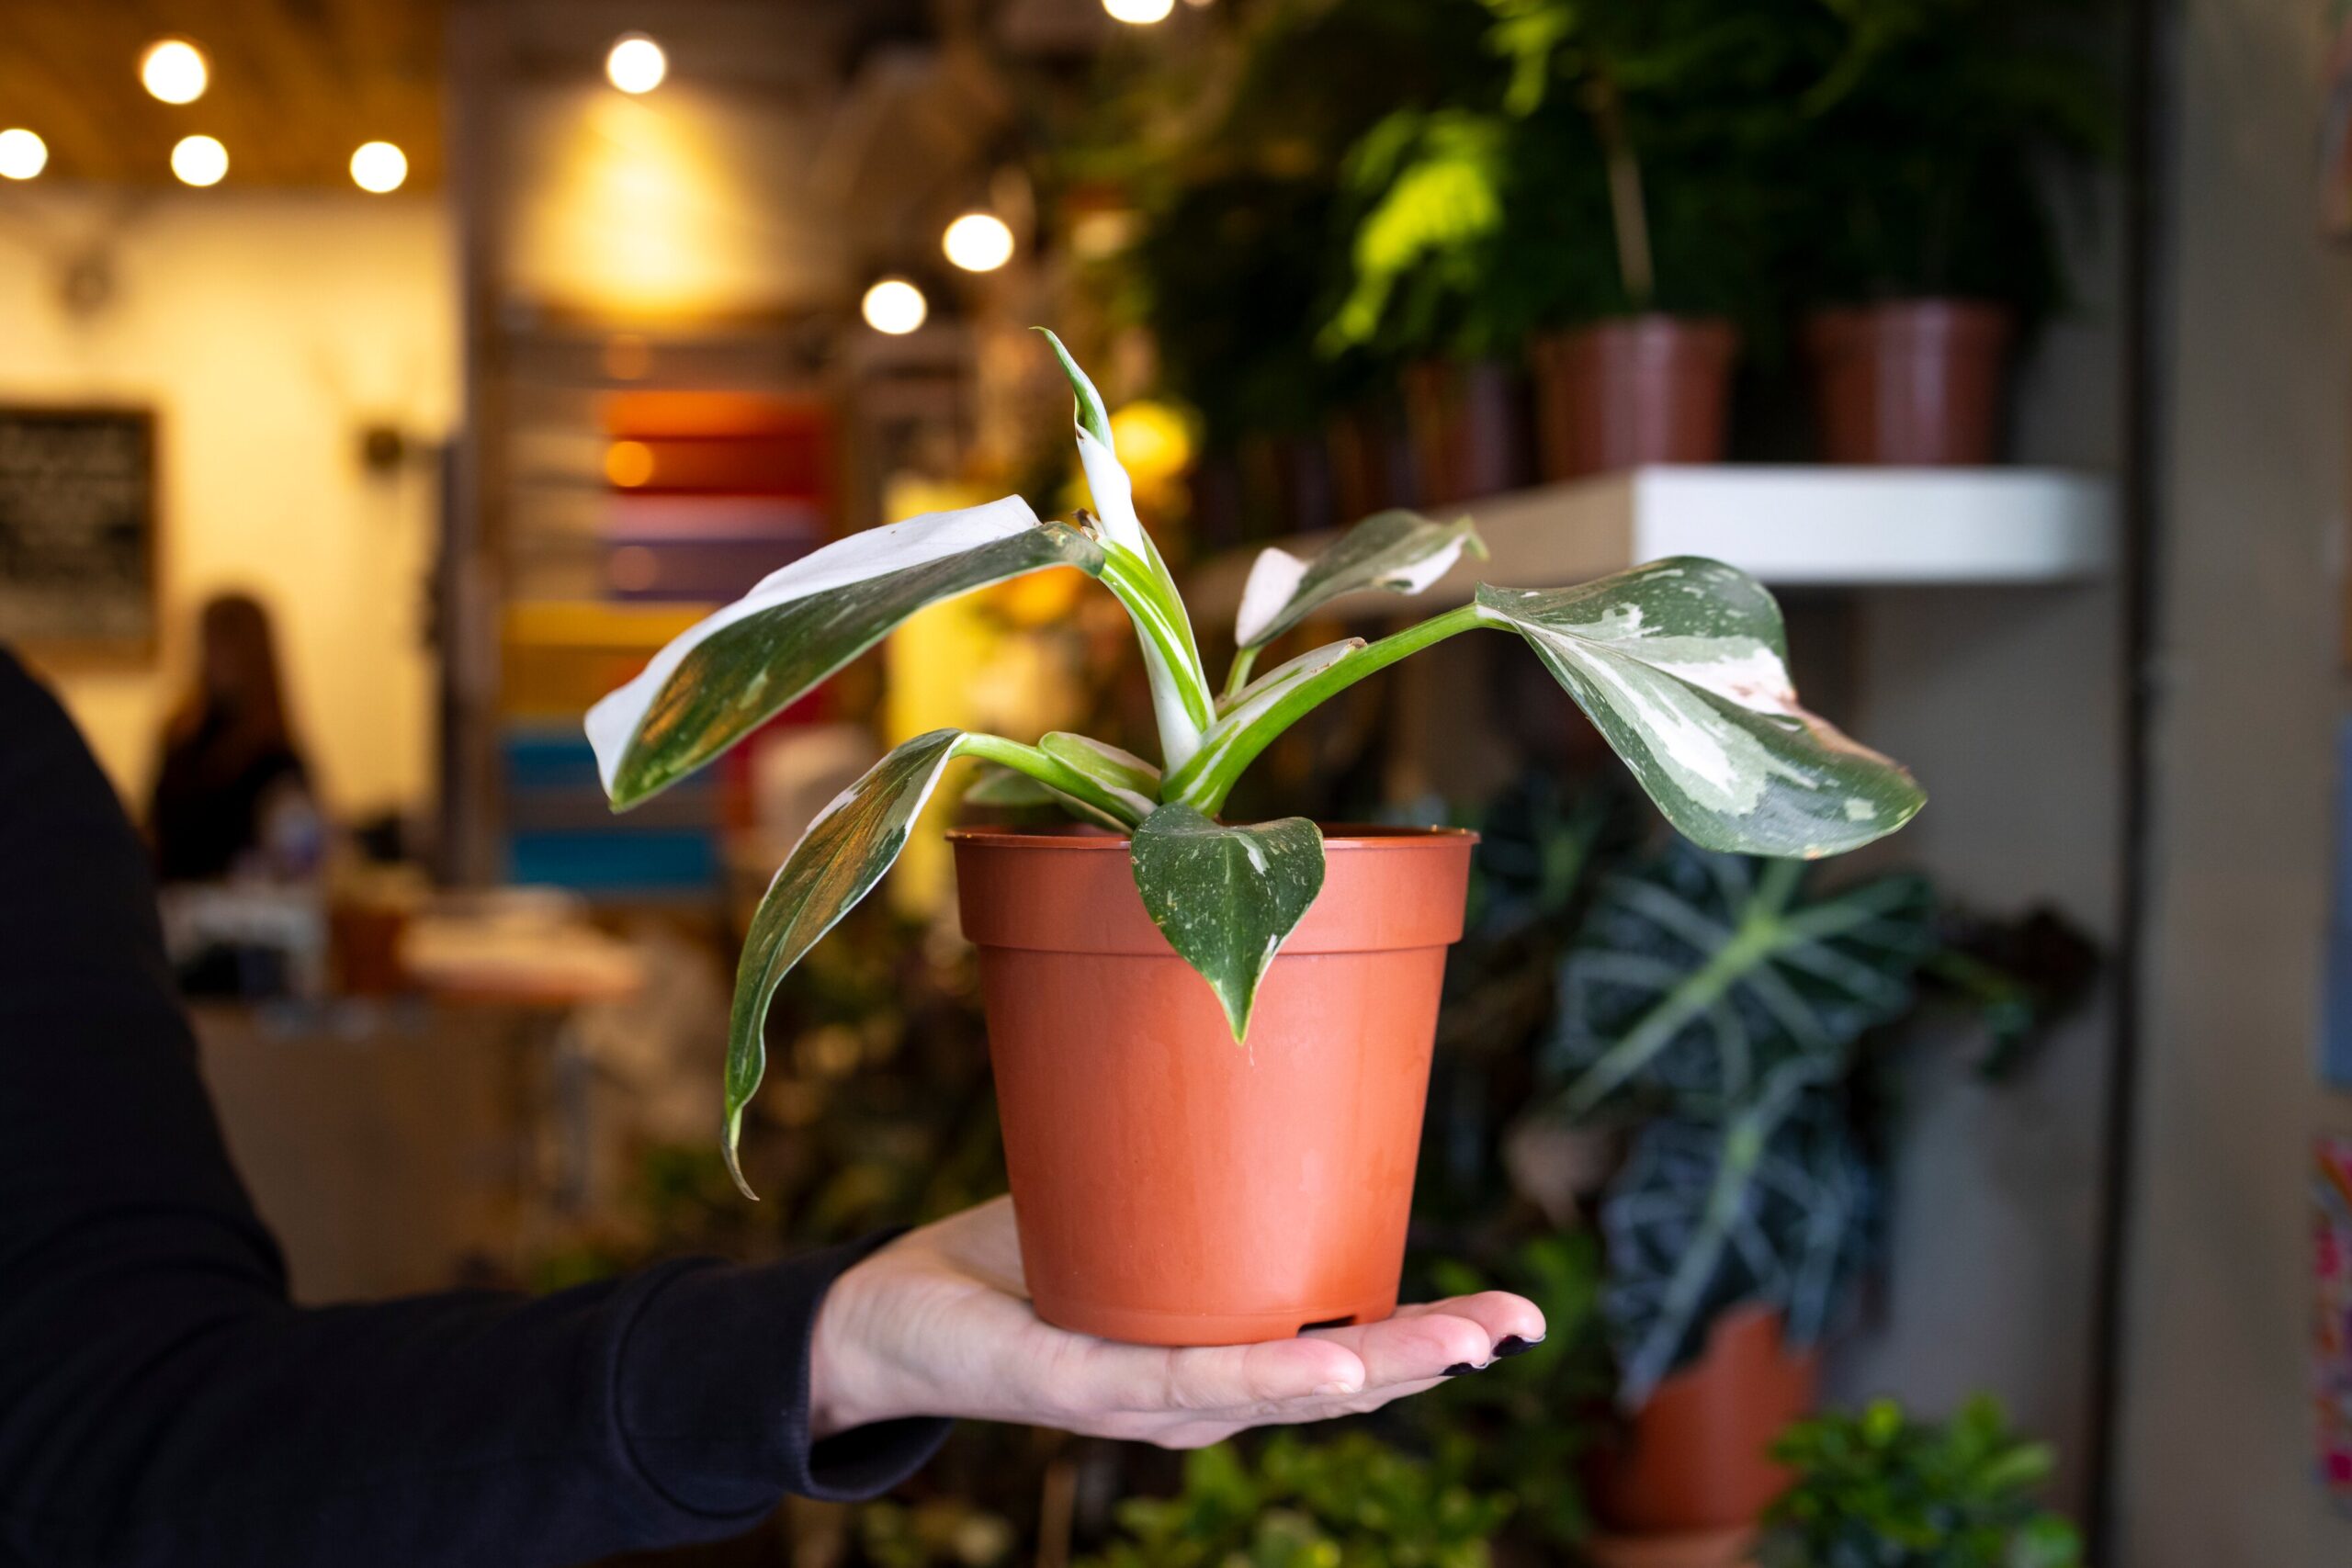 Visitors to the RHS Urban Show will be able to learn the secrets to growing happy houseplants